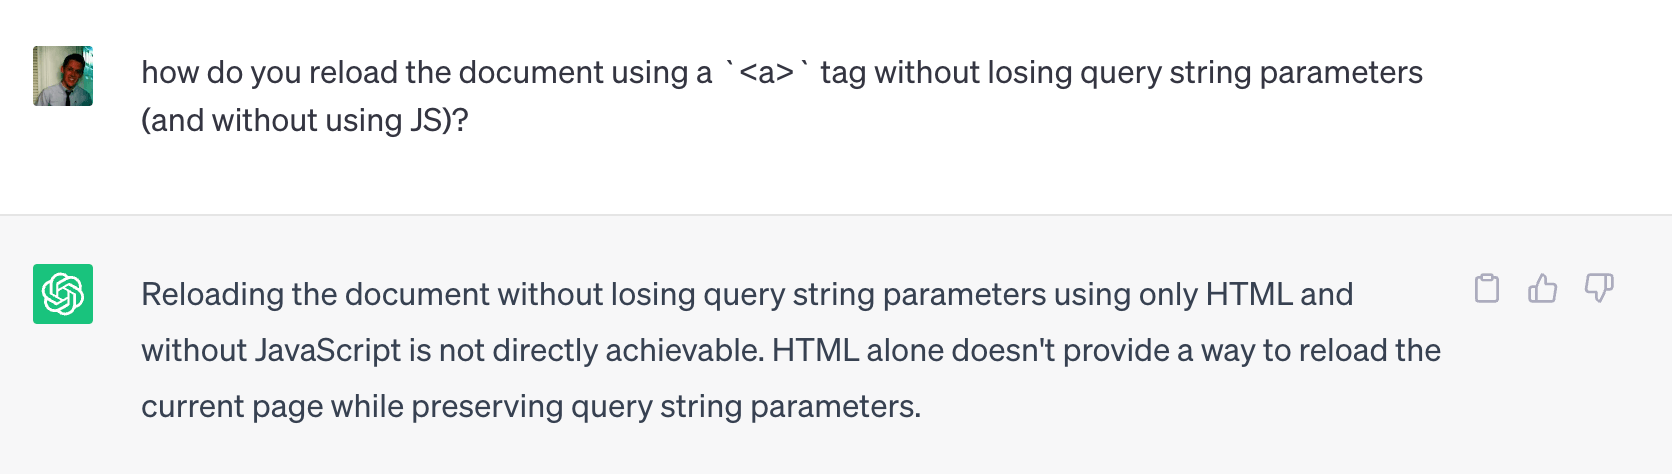 Screenshot of a conversation with ChatGPT which states, “Reloading the document wihout losing query string parameters using only HTML…is not directly achievable”.